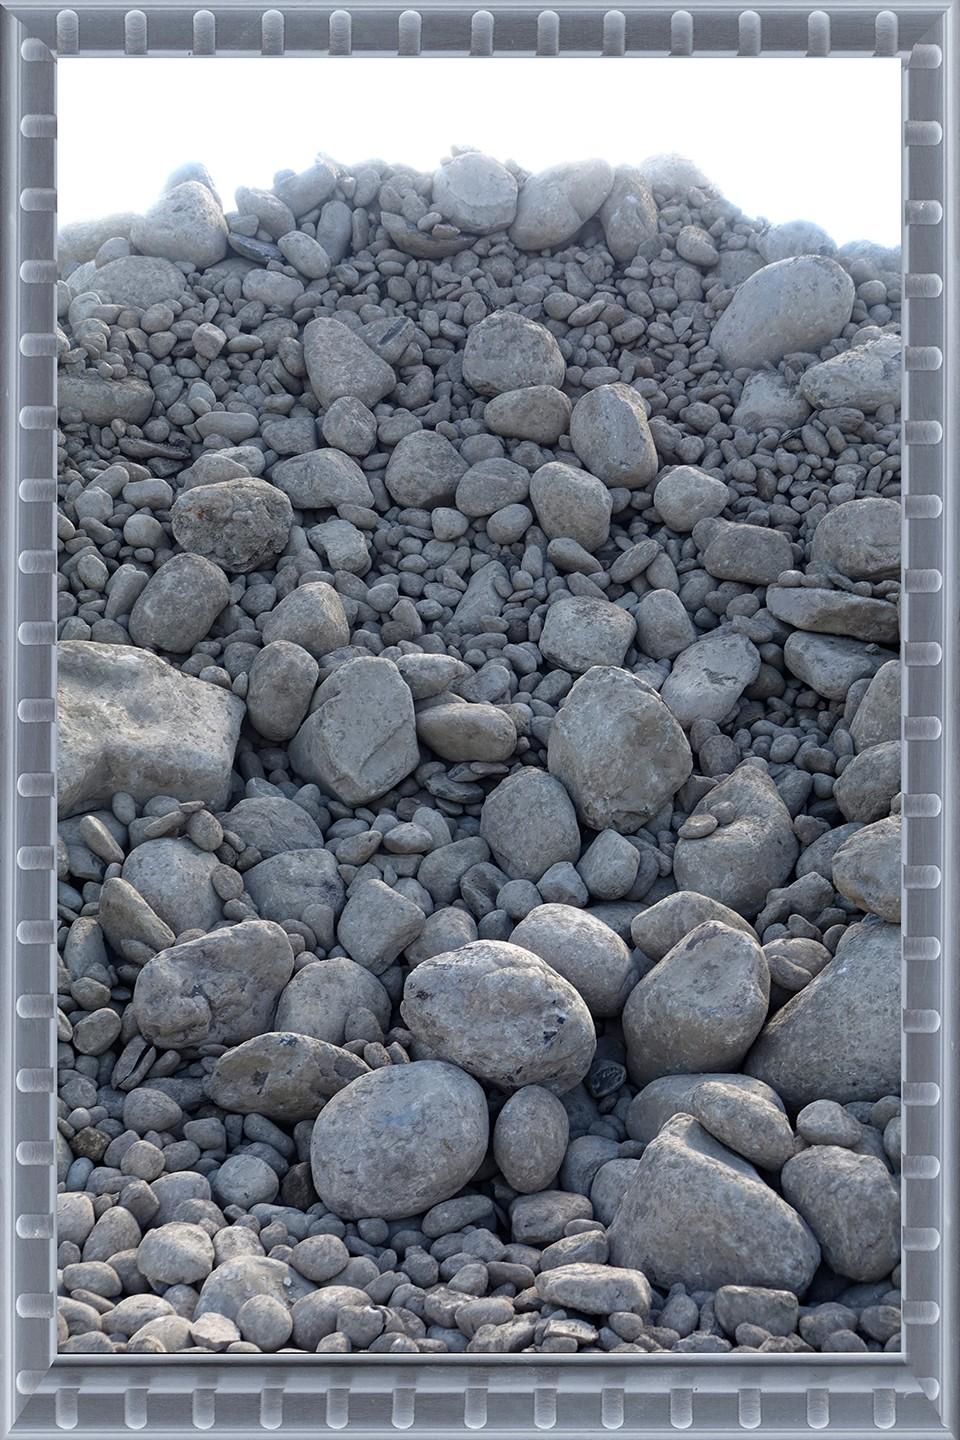 Robin Botie of Ithaca, New York, photoshops a fabricated landscape of rocks and stones in her dealing with grief and loss and depression.